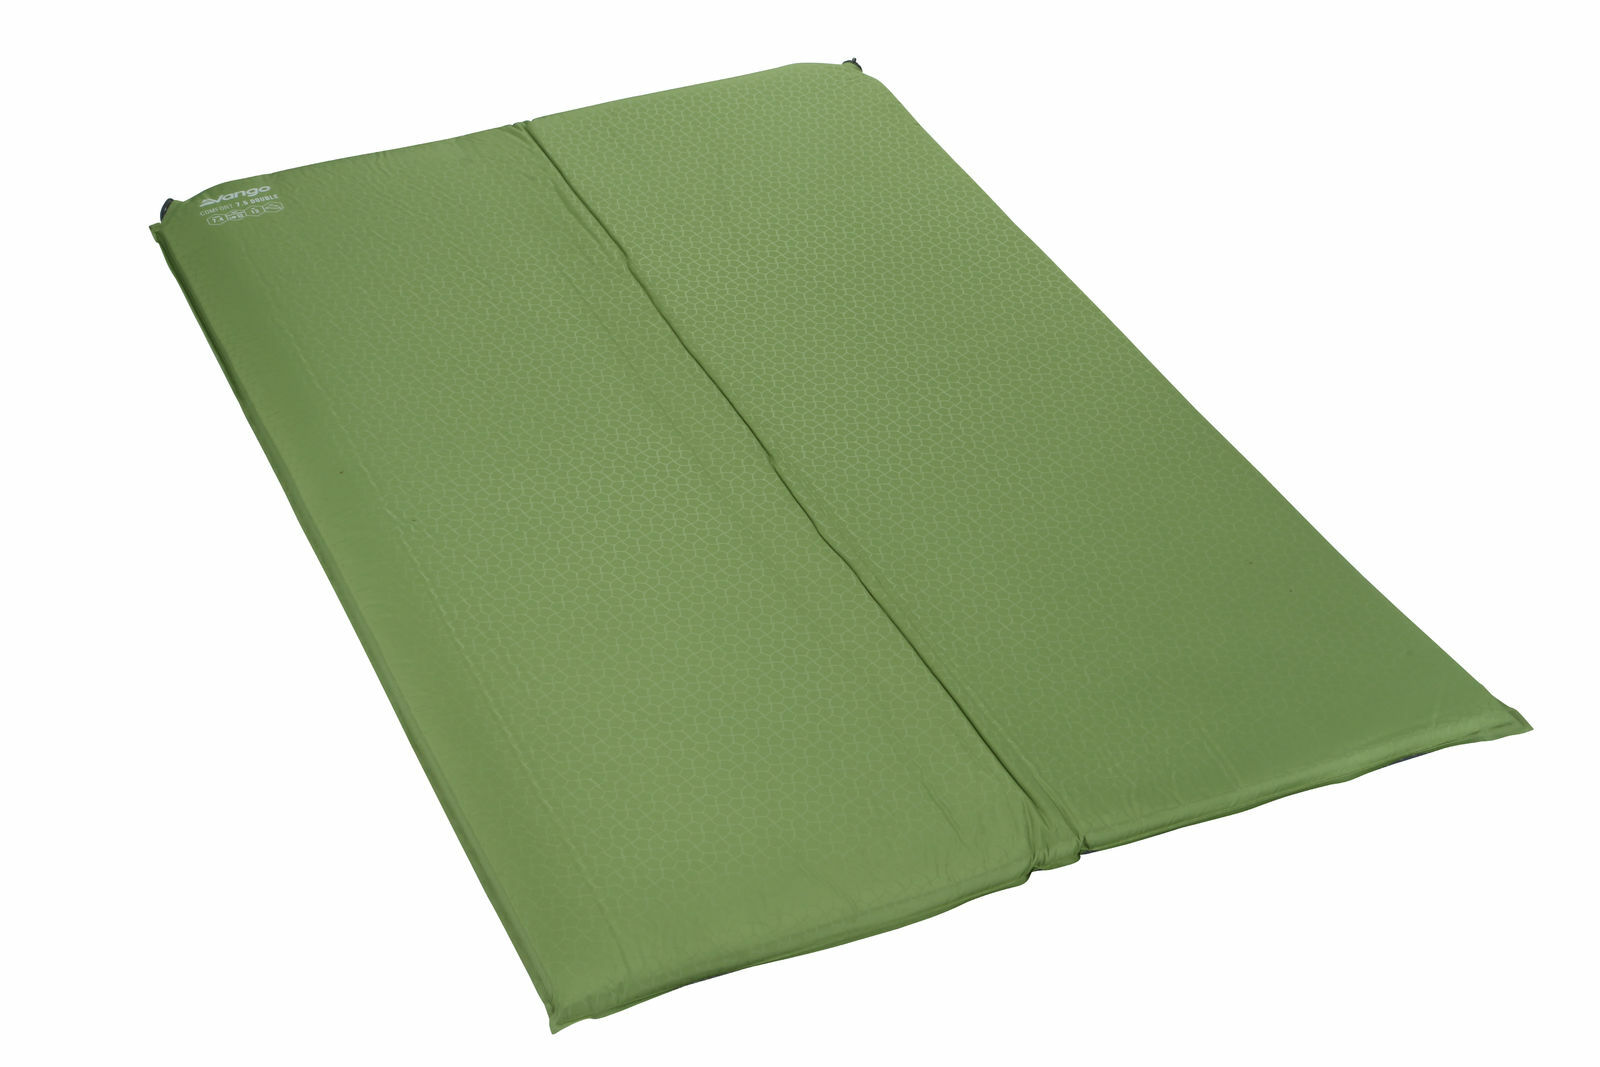 Three-quarter view of the Vango Comfort 7.5 Double Self-Inflating Mat in green.